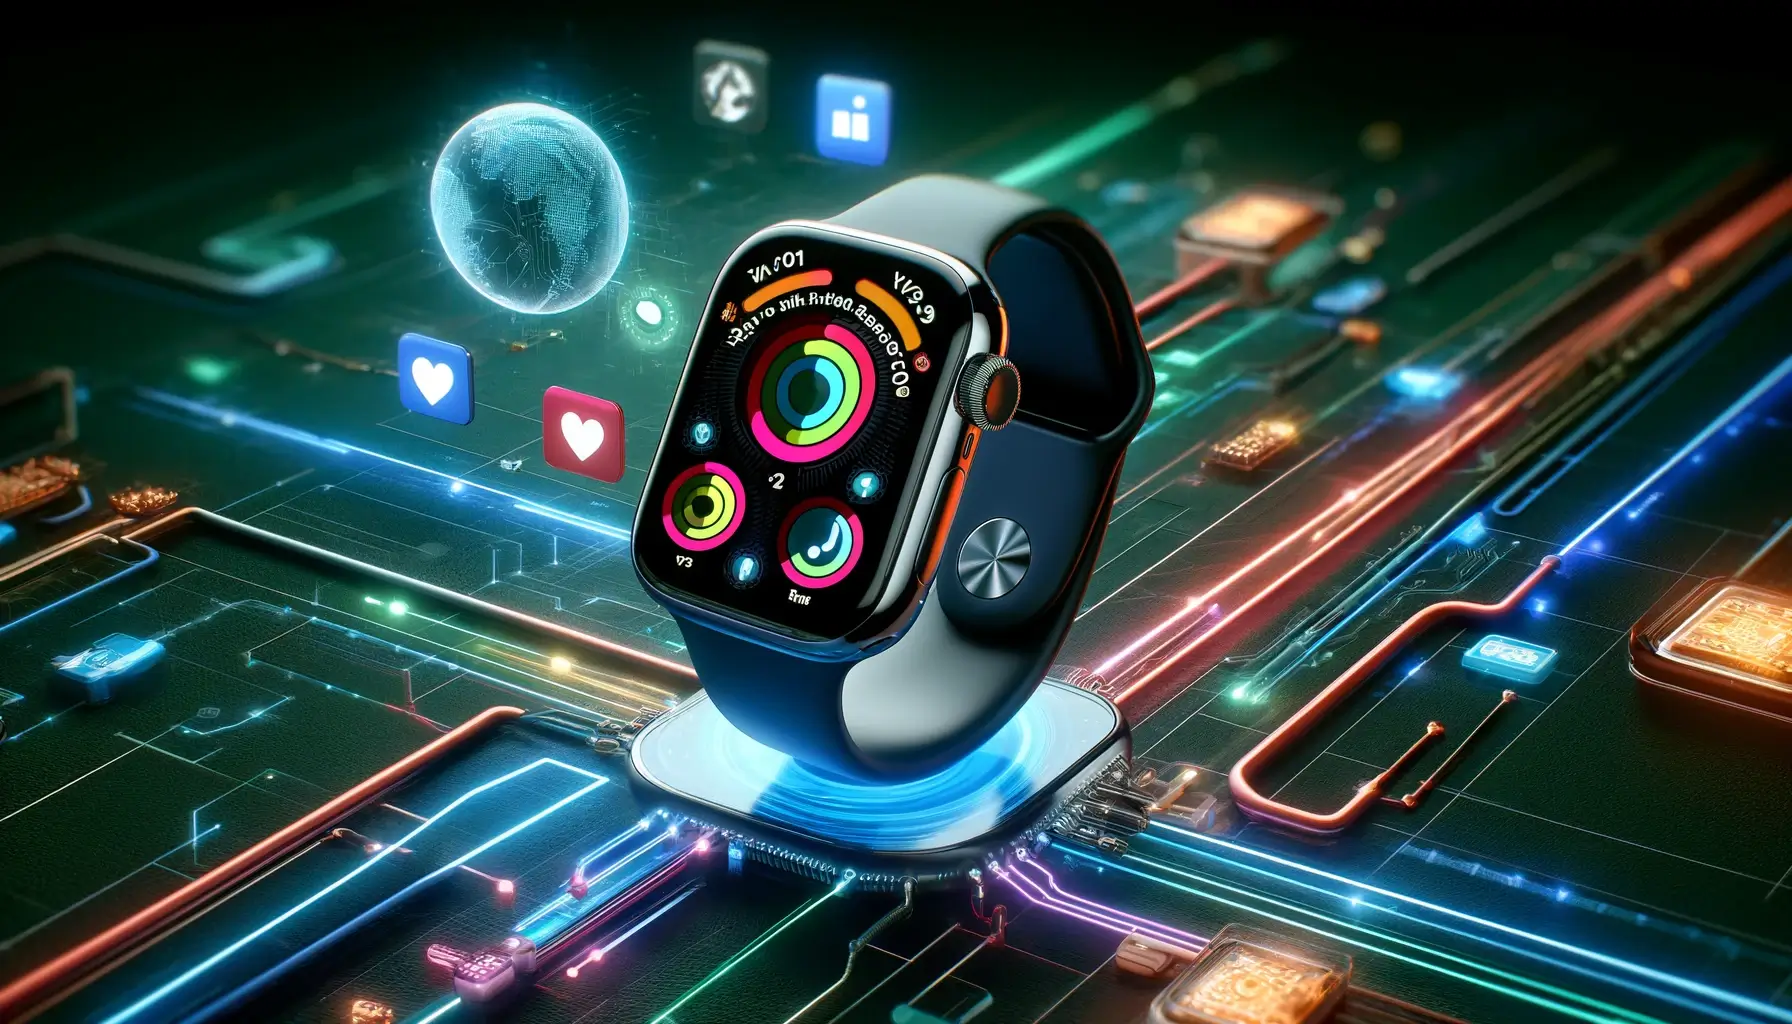 AI Apple Watch features